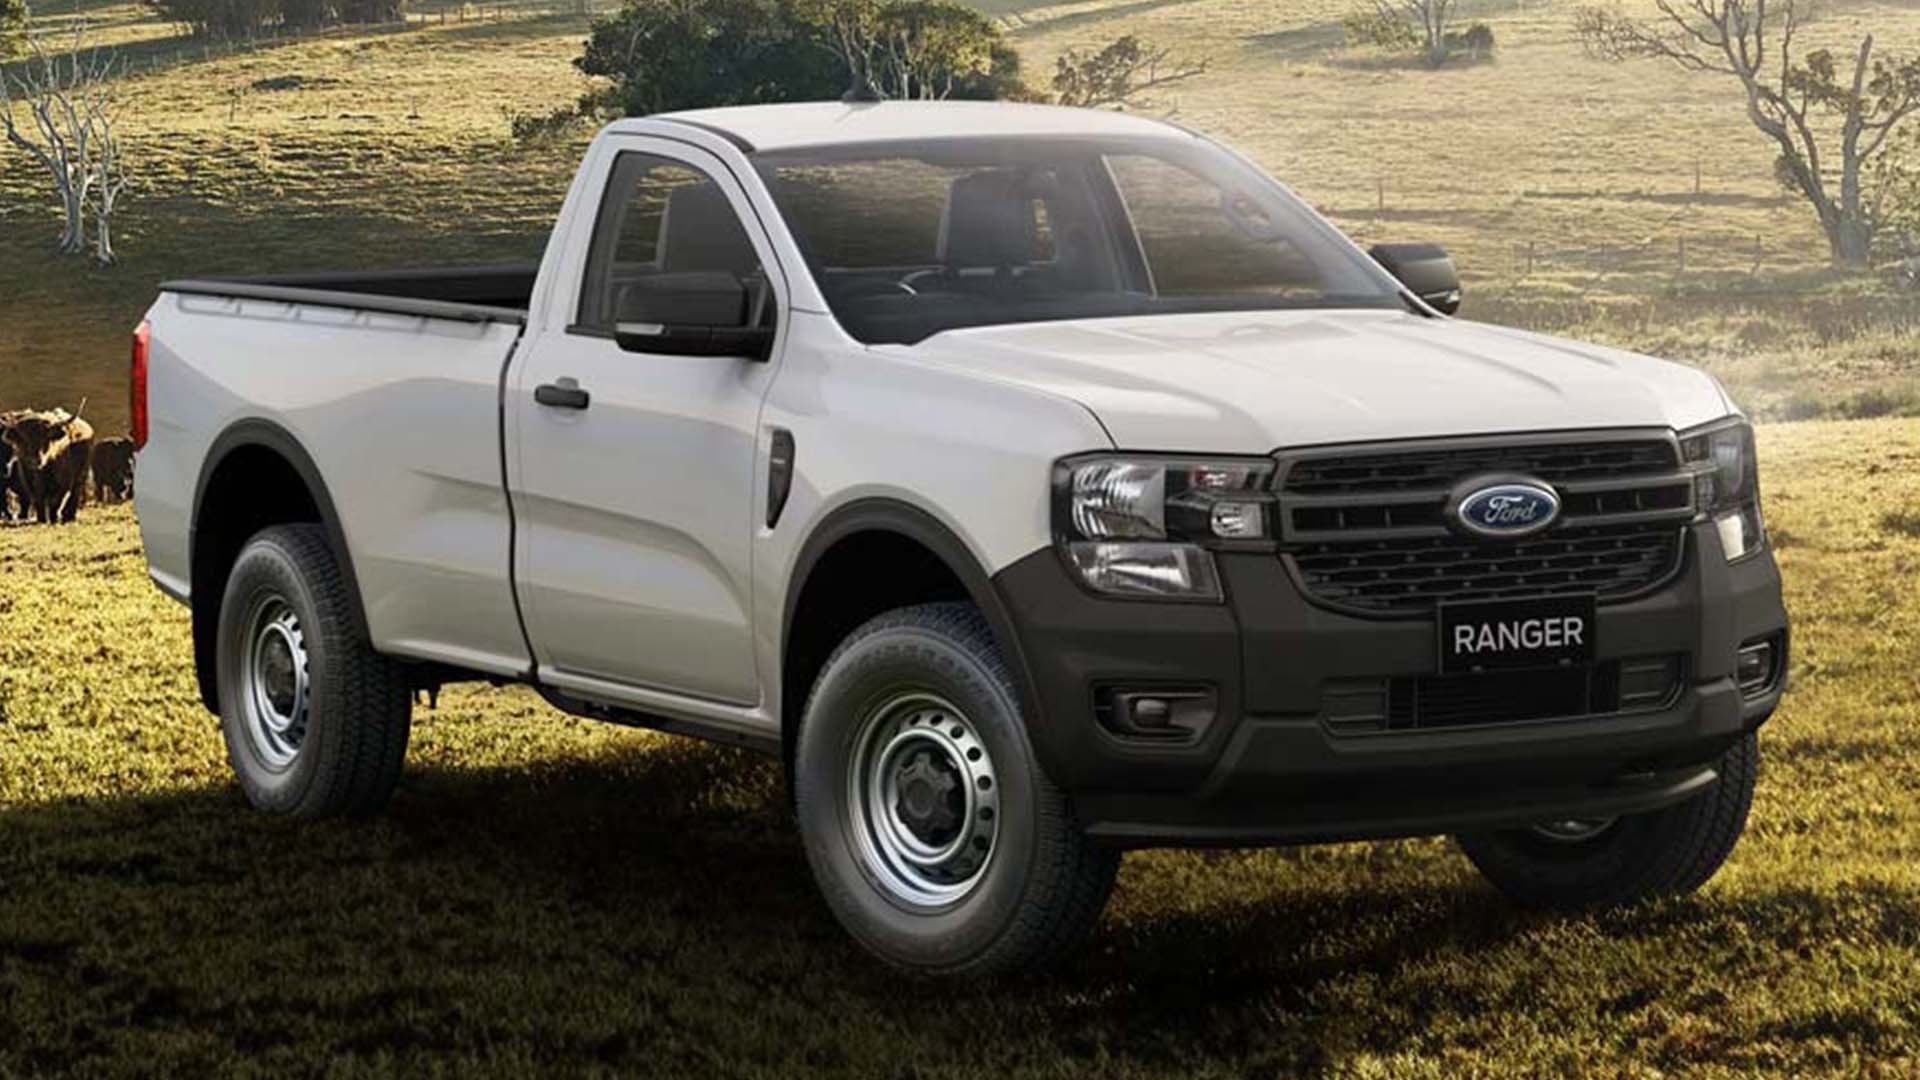 New Ford Ranger single cabs to hit the ground in March